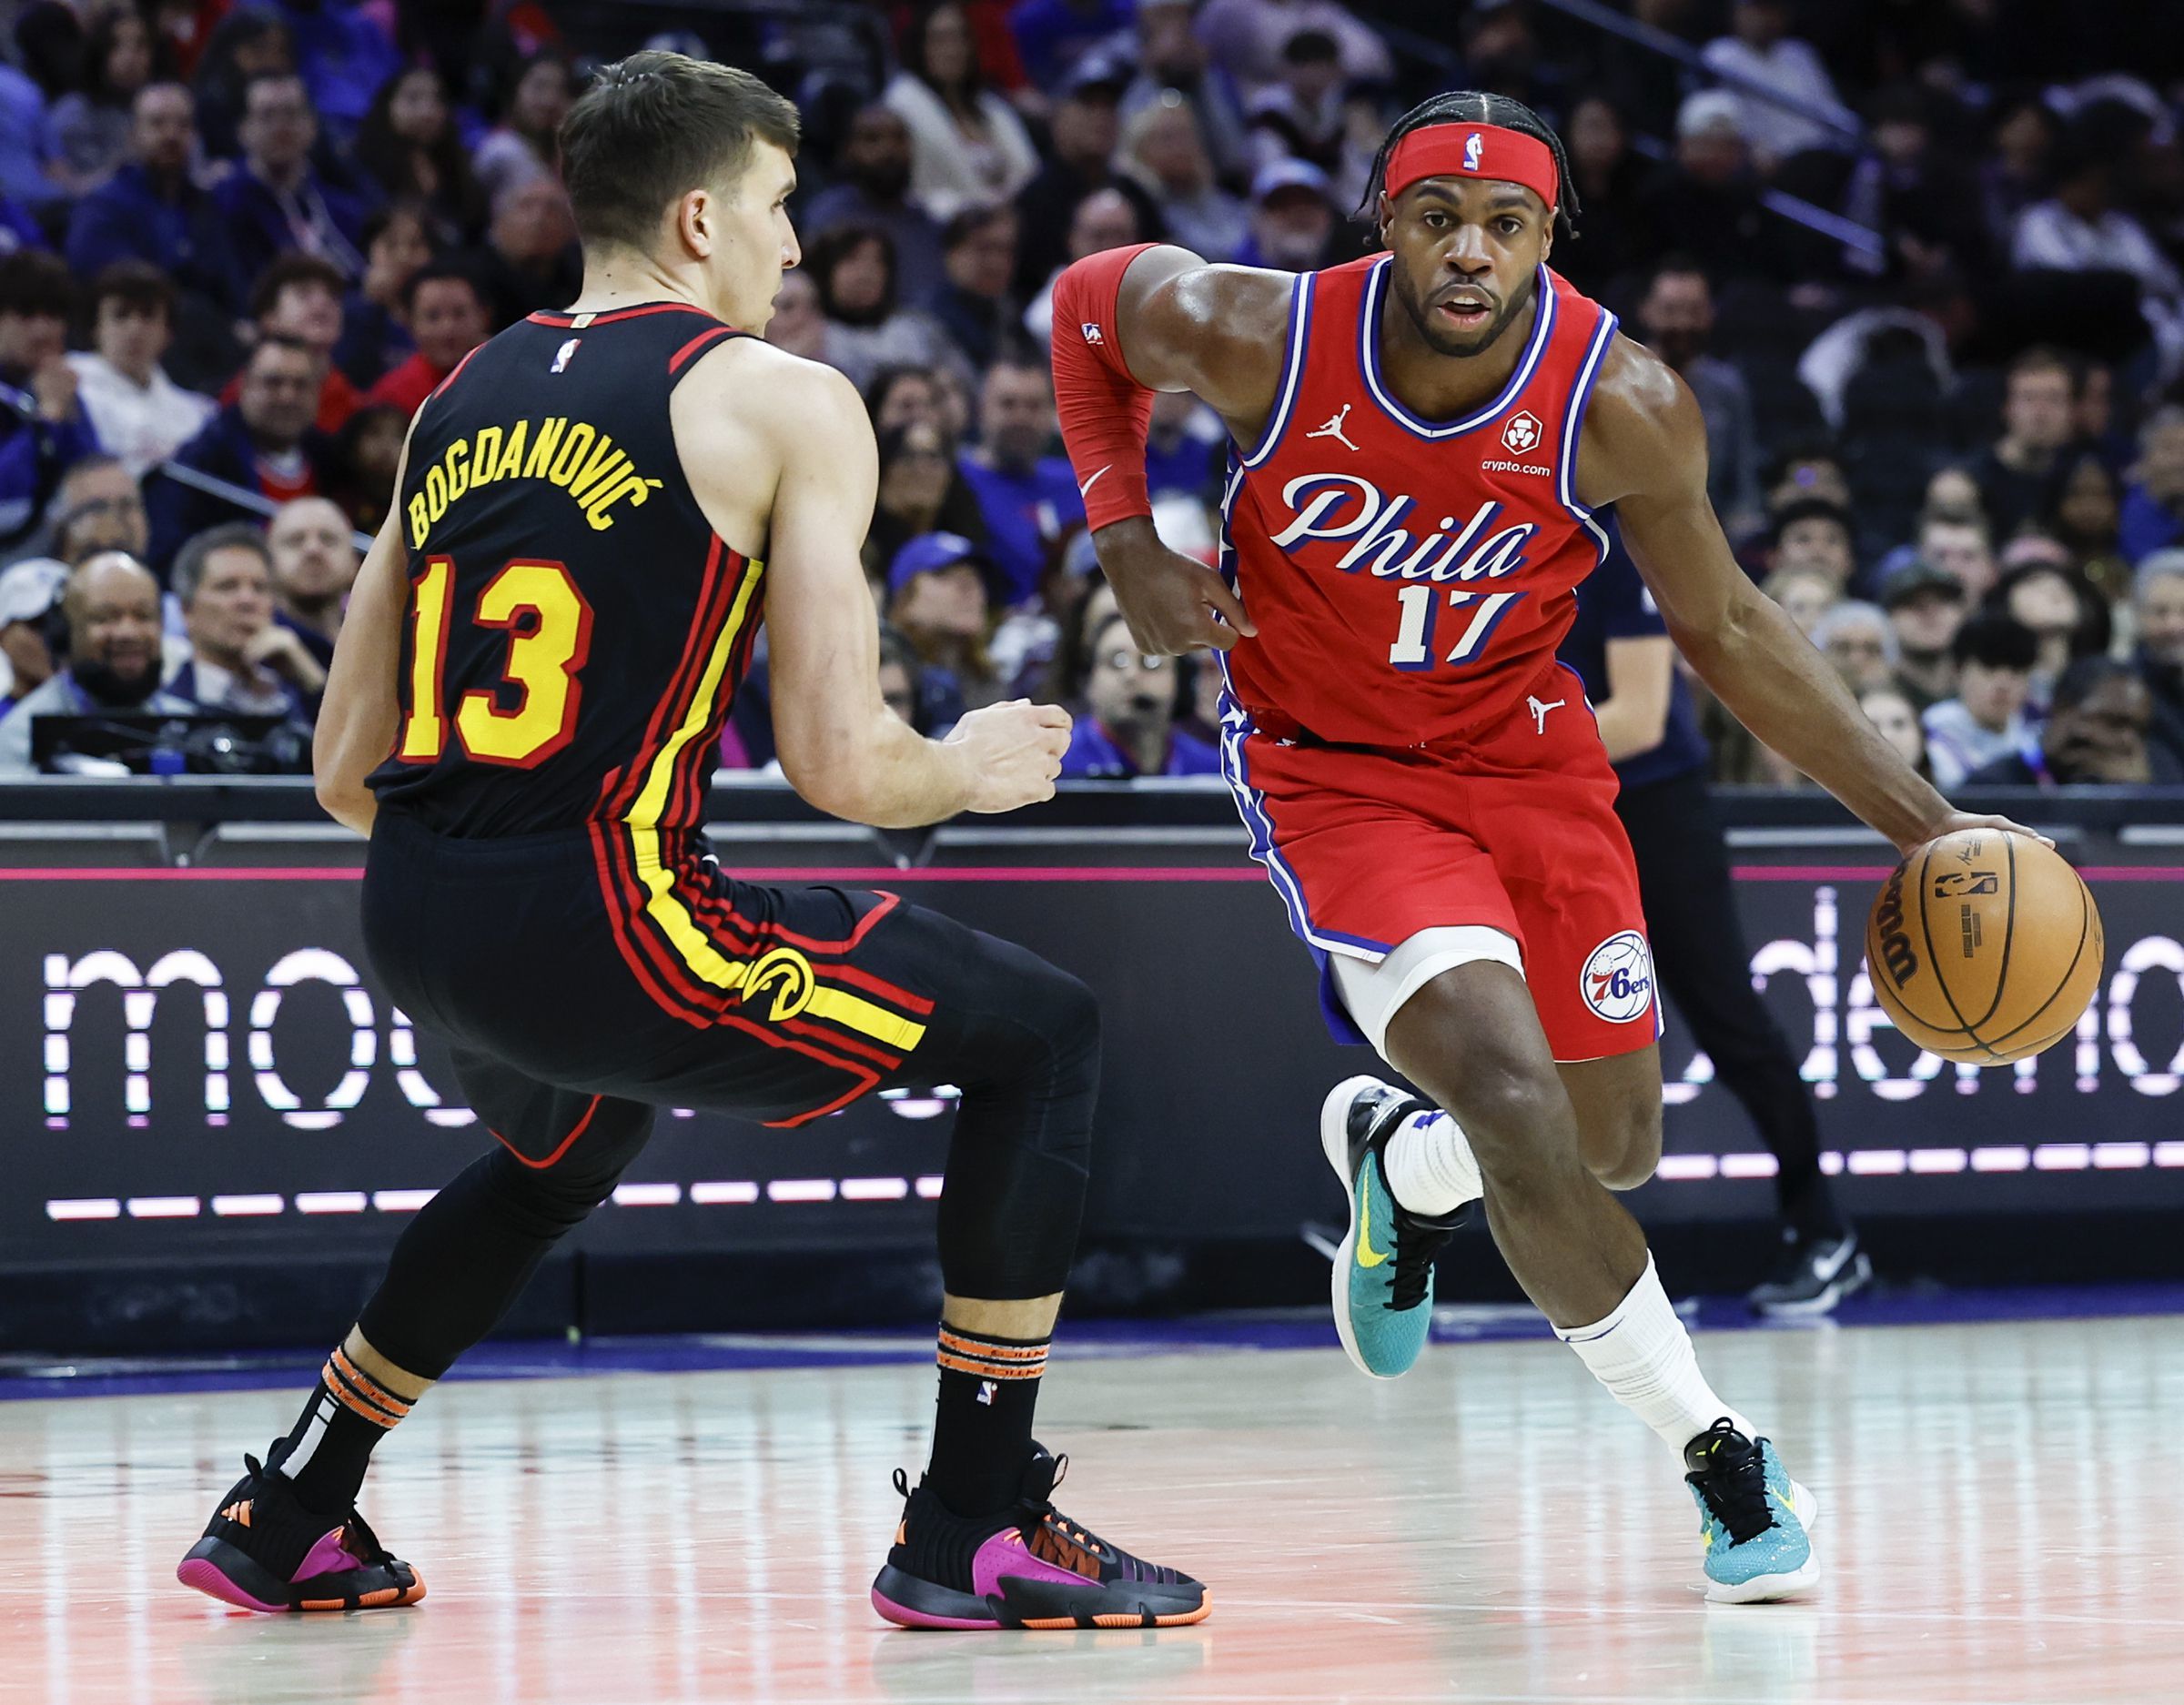 sixers fall to hawks, but buddy hield and cameron payne star in their philly debuts